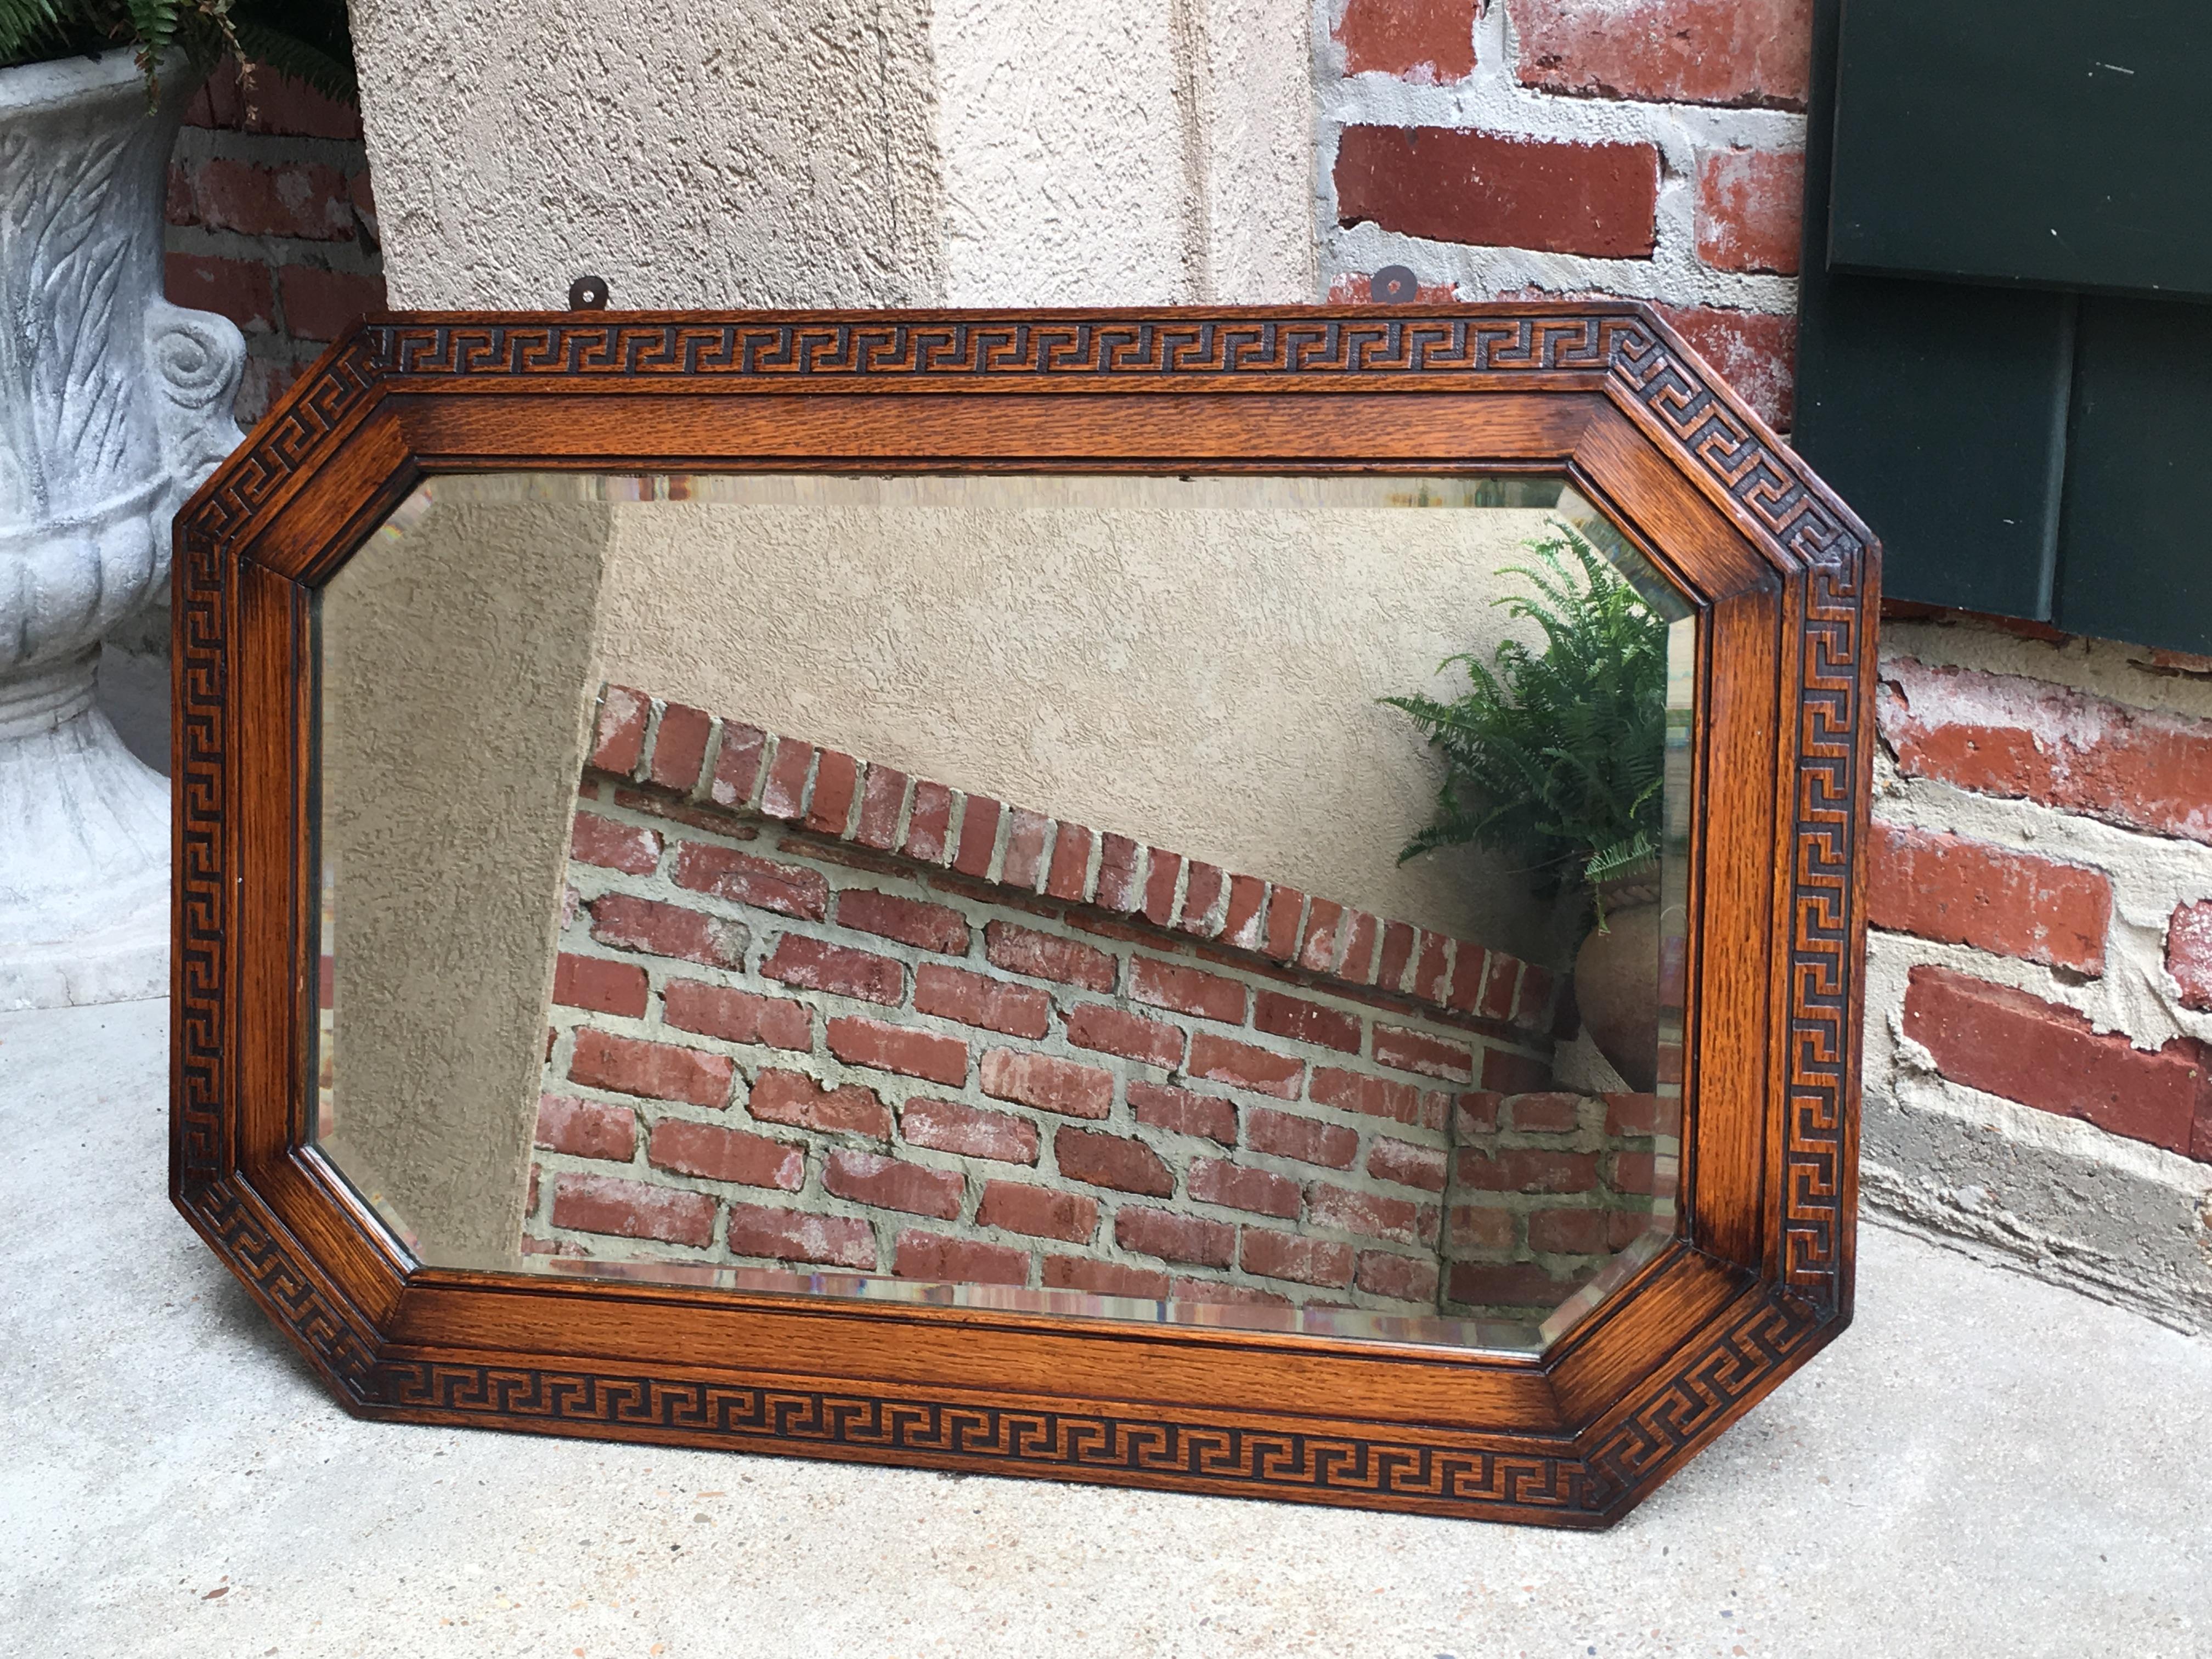 Direct from England, a lovely antique English oak frame wall mirror, in traditional Jacobean octagon shape, with stunning Greek Key carved band around the entire eight-sided edge!
~ Original beveled mirror
~ Hangs either way, horizontally or